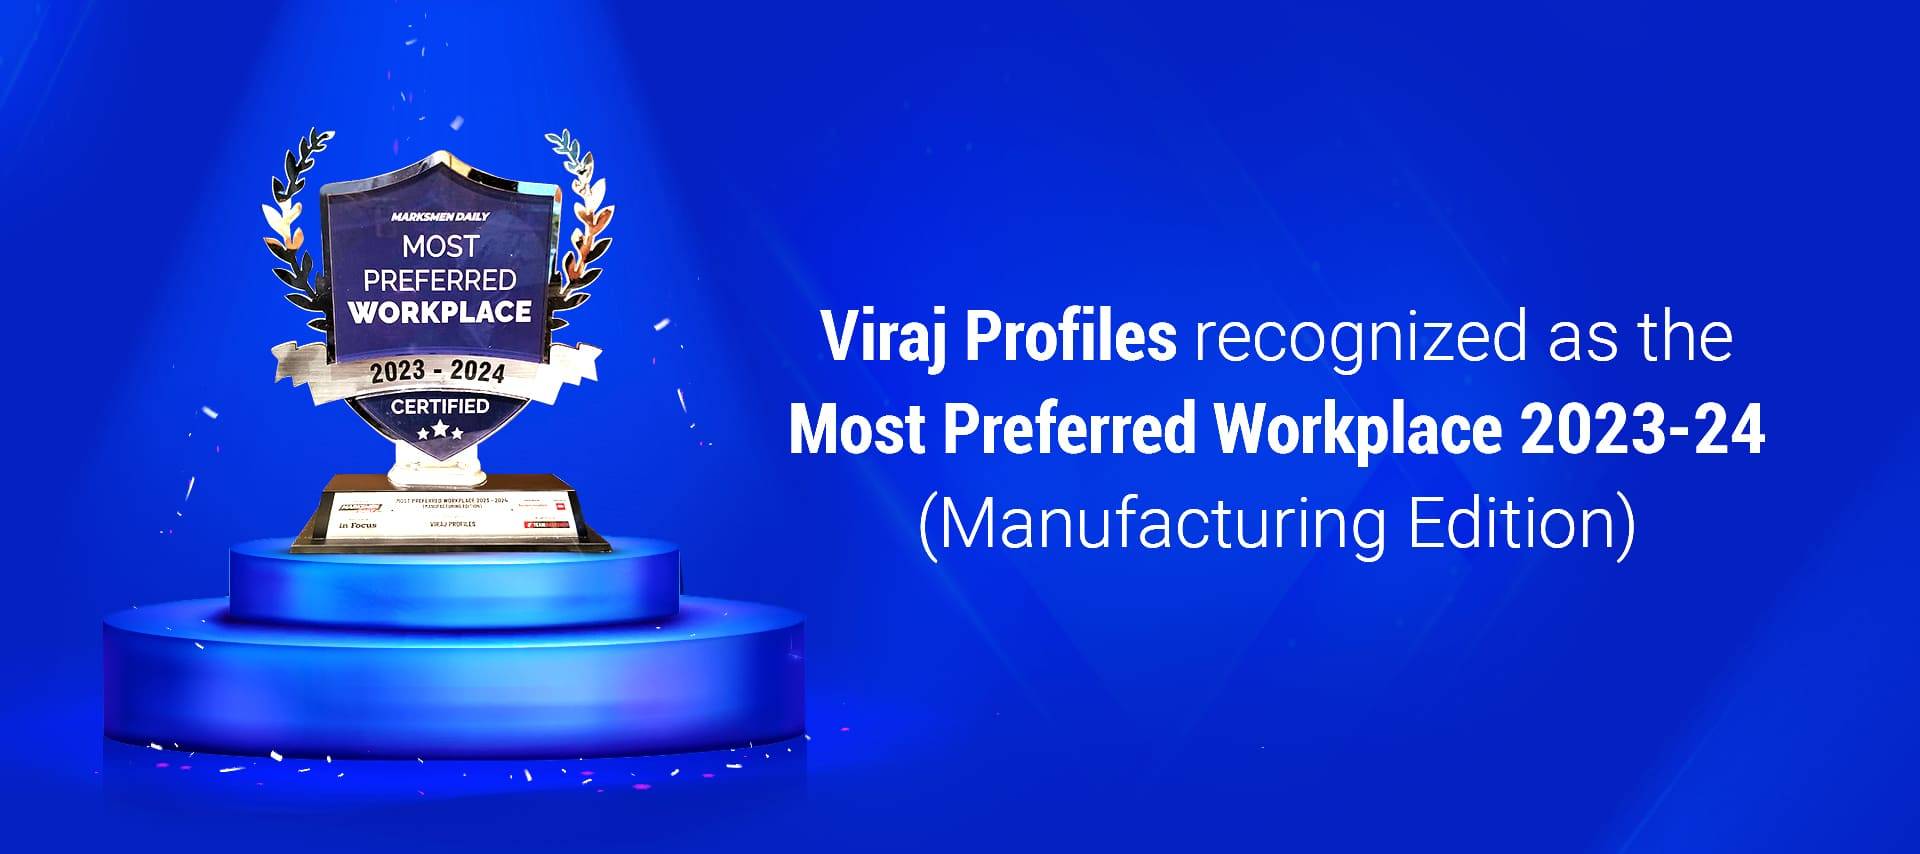 Viraj Profile recognized as the most Preferred Workplace 2023 - 2024